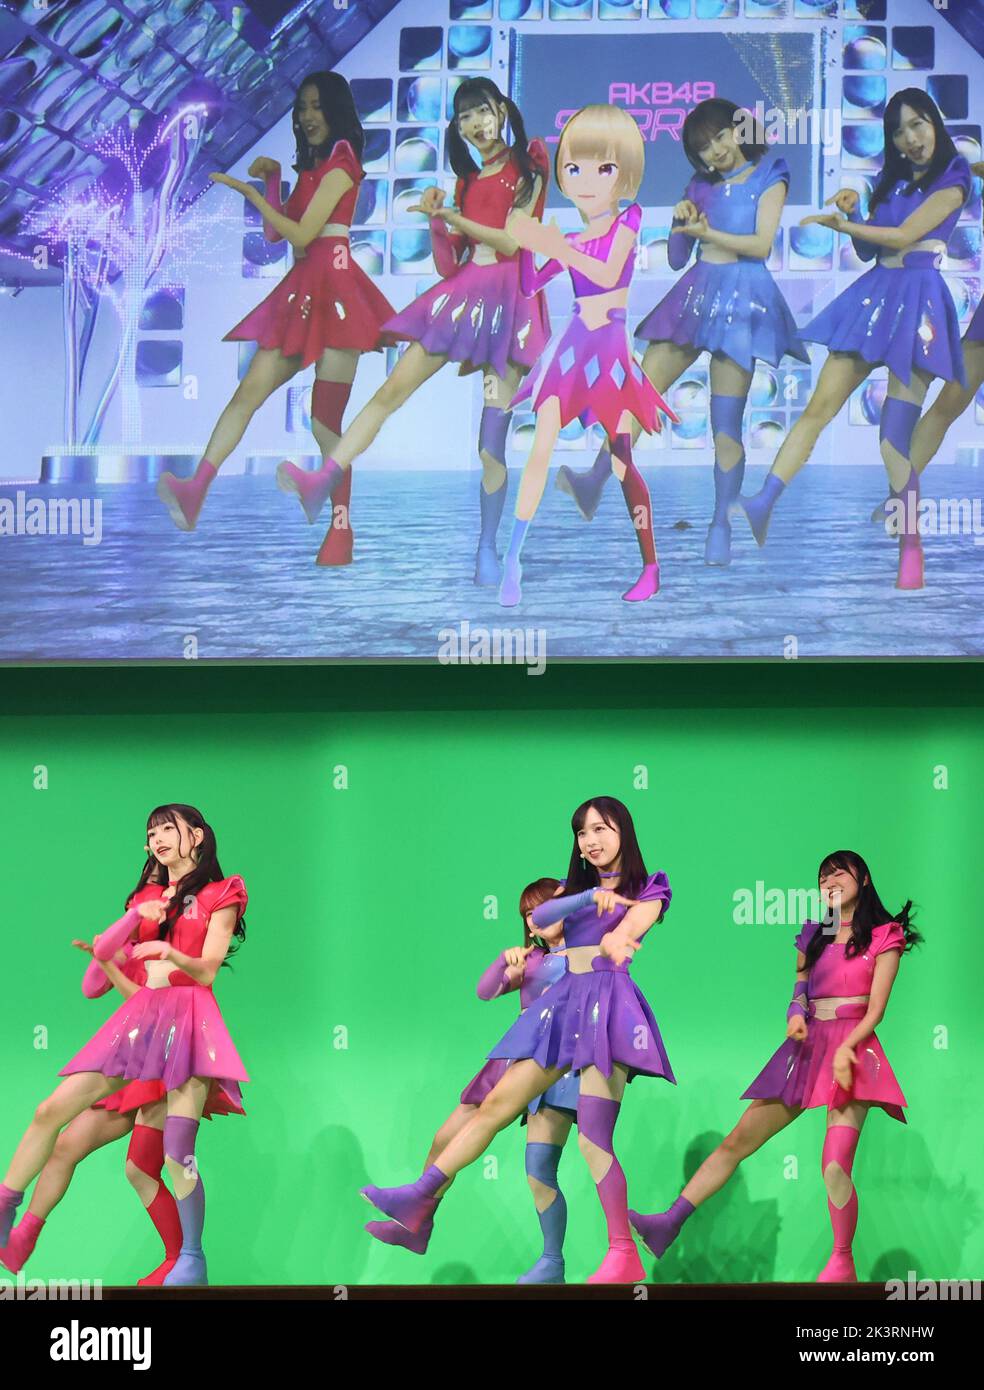 Tokyo, Japan. 28th Sep, 2022. The new real and virtual mixed unit 'AKB48 SURREAL' perform as they will perform in the 'XR World', a metaverse world of NTT group's new XR business company 'NTT Qonoq' in Tokyo on Wednesday, September 28, 2022. NTT group, mainly NTT Docomo invest 60 billion yen for the new XR business company NTT Qonoq. Credit: Yoshio Tsunoda/AFLO/Alamy Live News Stock Photo